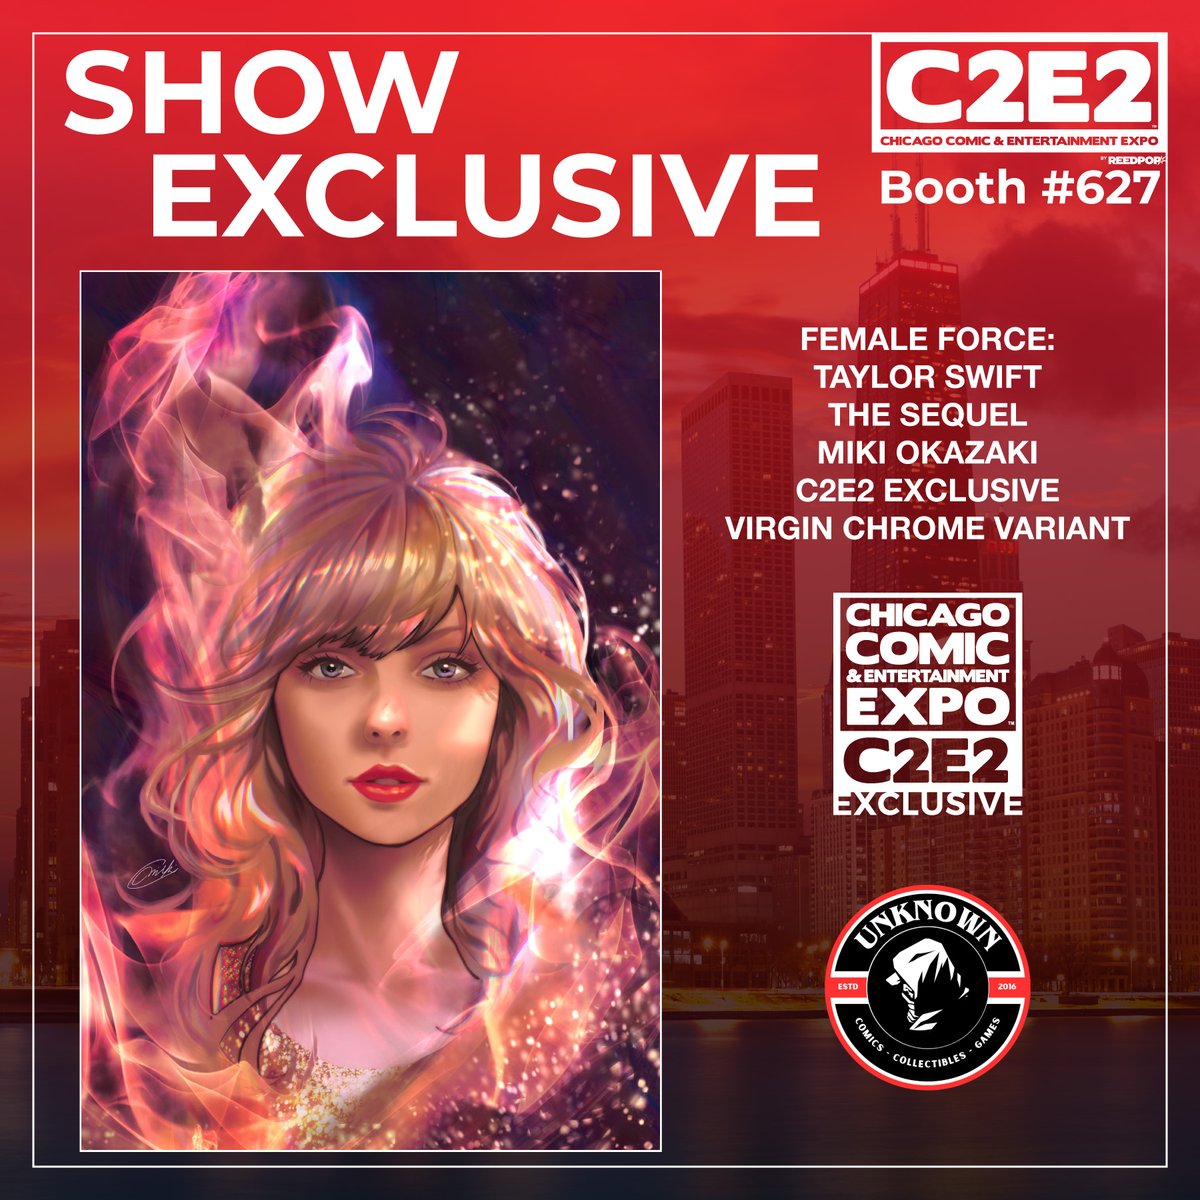 Unknown Comics C2E2 Exclusive: Female Force: Taylor Swift - The Sequel (Miki Okazaki) Swifties, the adventure continues! FEMALE FORCE: TAYLOR SWIFT - THE SEQUEL, featuring the captivating art of Miki Okazaki #C2E2 #UnknownComicBooks #TaylorSwift #MikiOkazaki